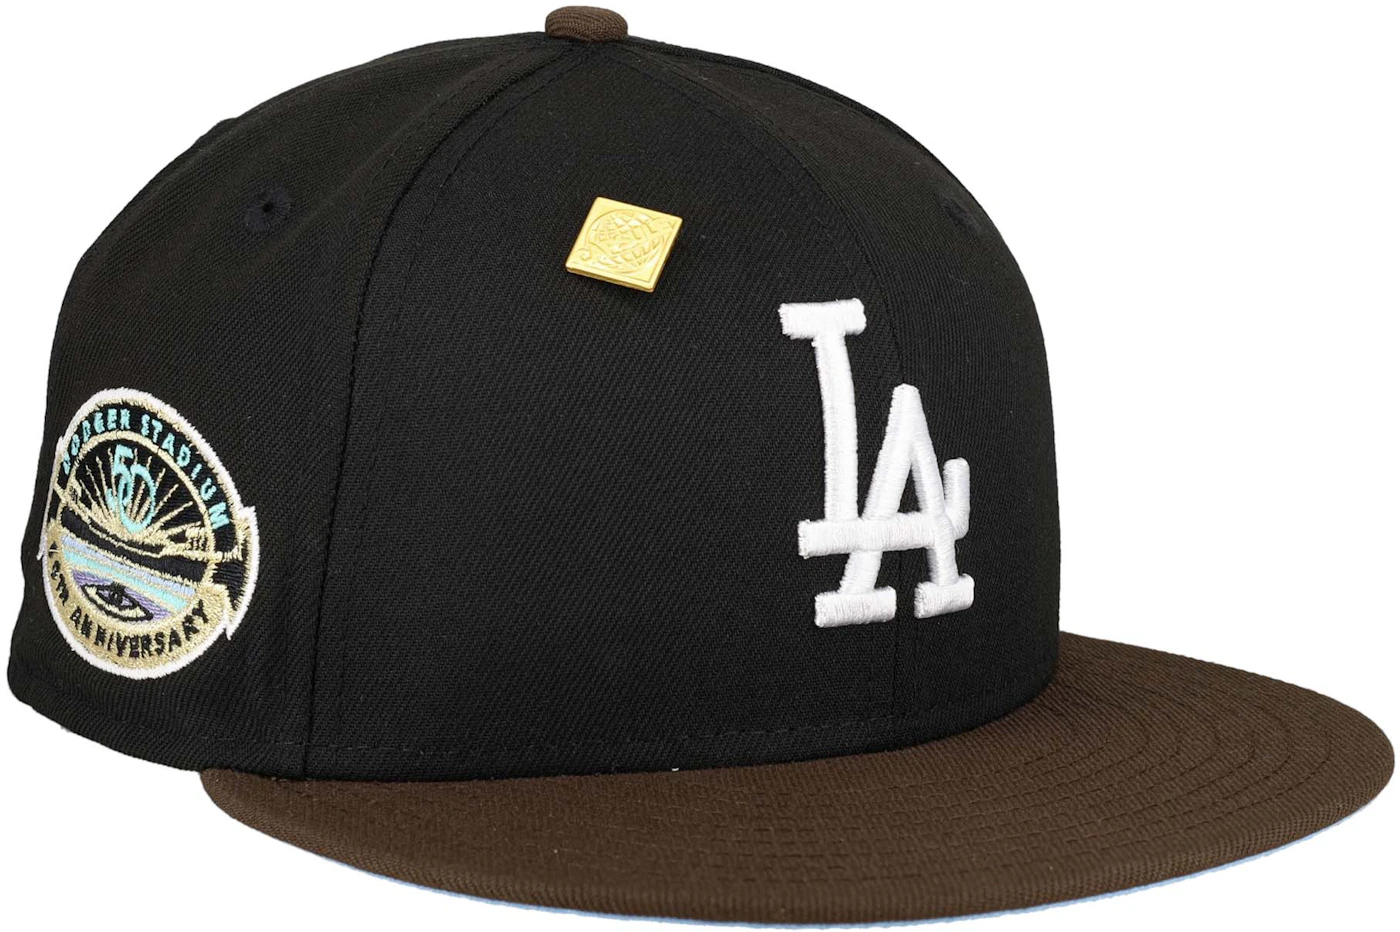 Los Angeles Angels New Era Retro 59FIFTY Fitted Hat - Stone/Red